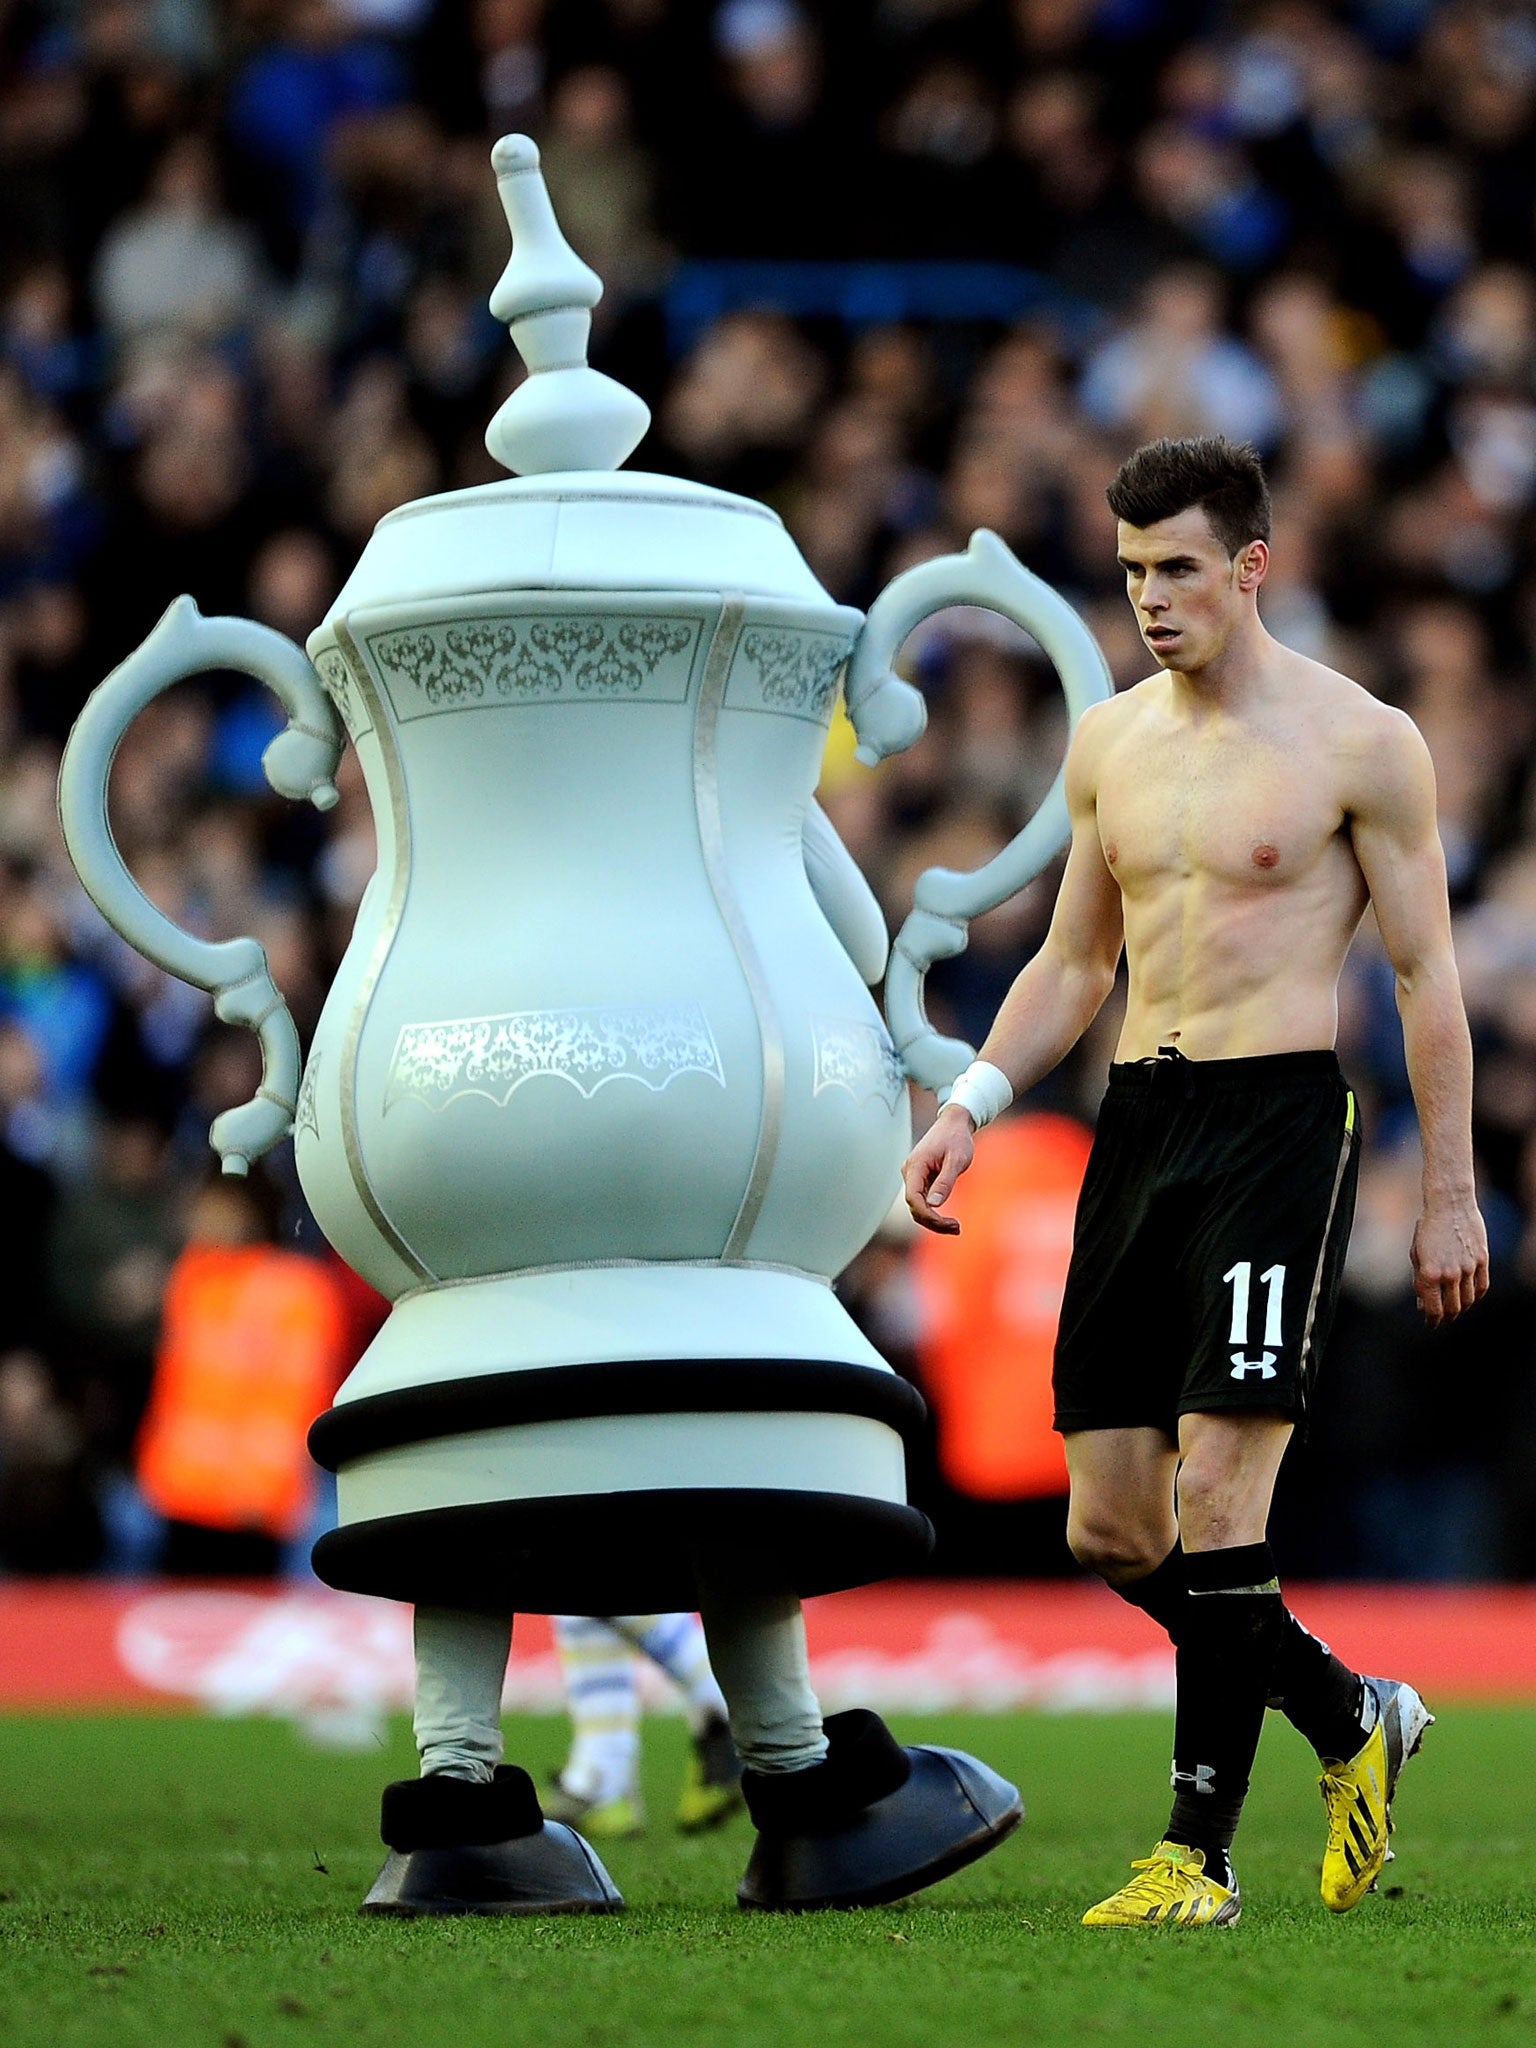 Defeating Gareth Bale and Tottenham in the FA Cup with Leeds was a high point of 2013